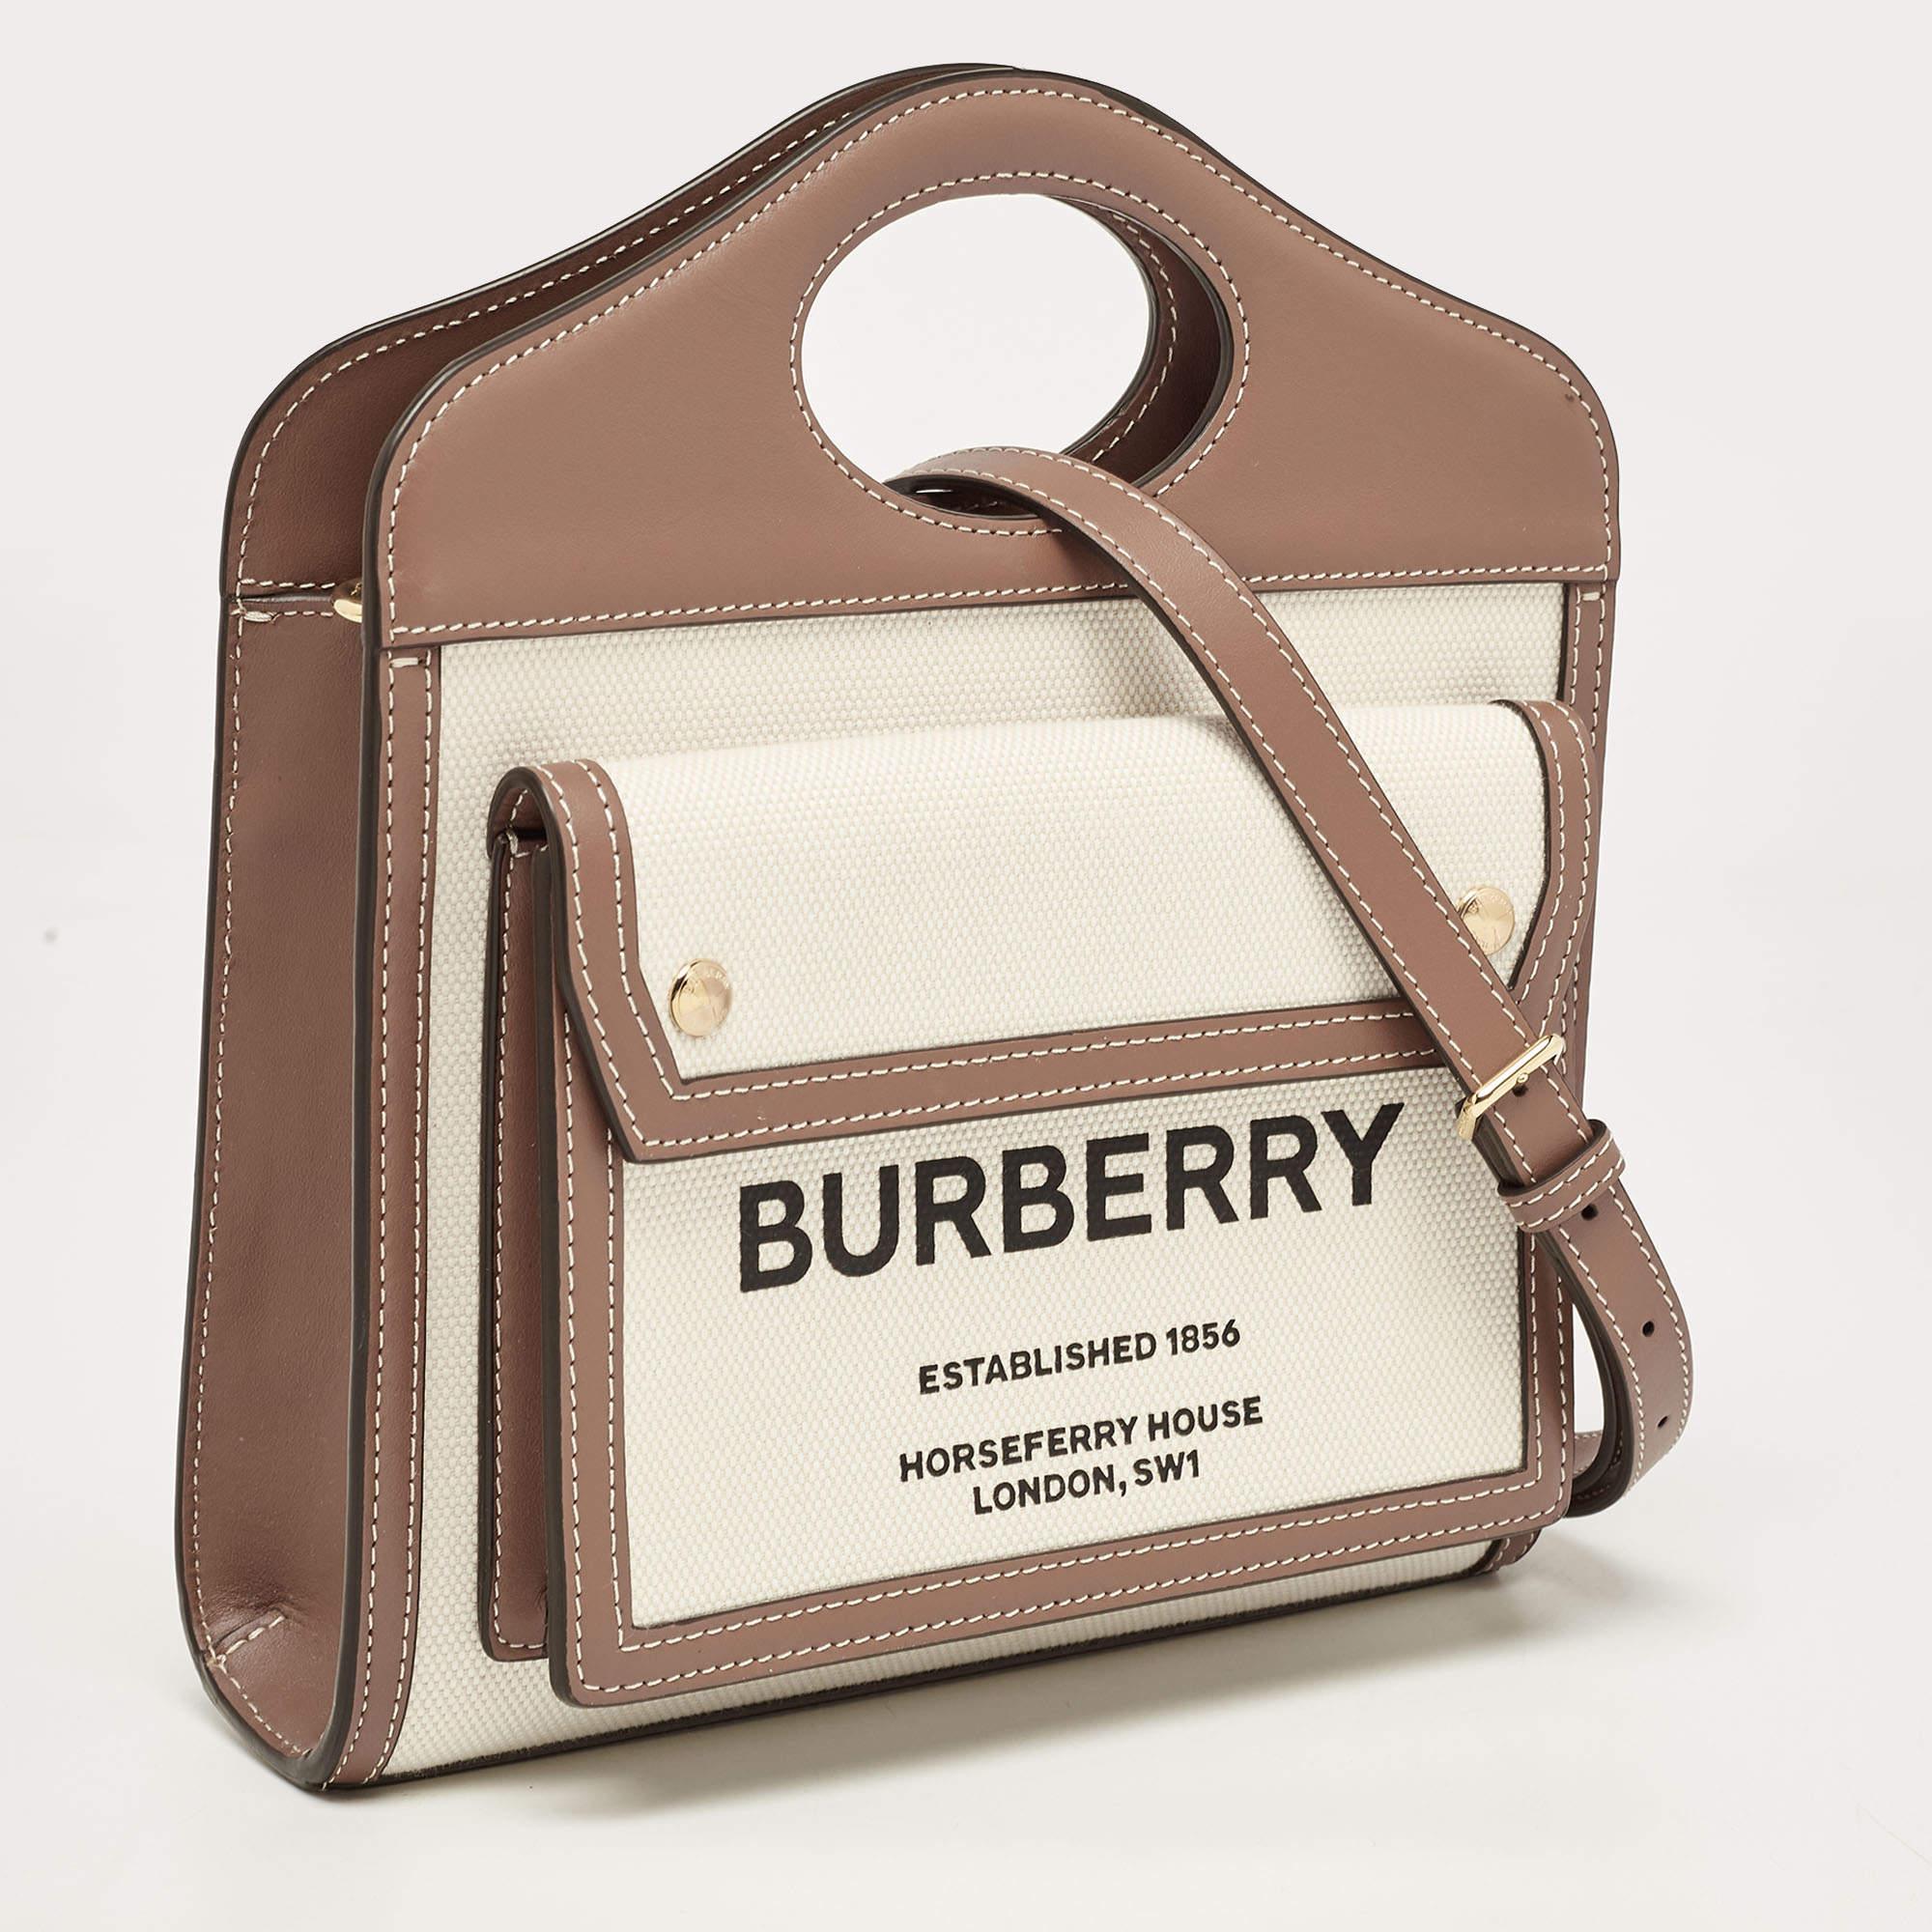 This stylish and durable tote by Burberry is perfect for everyday use. Crafted from canvas & leather, it comes in hues of beige & brown. it has in-built handles, a front flap pocket with the logo detail, spacious canvas interior and gold-tone